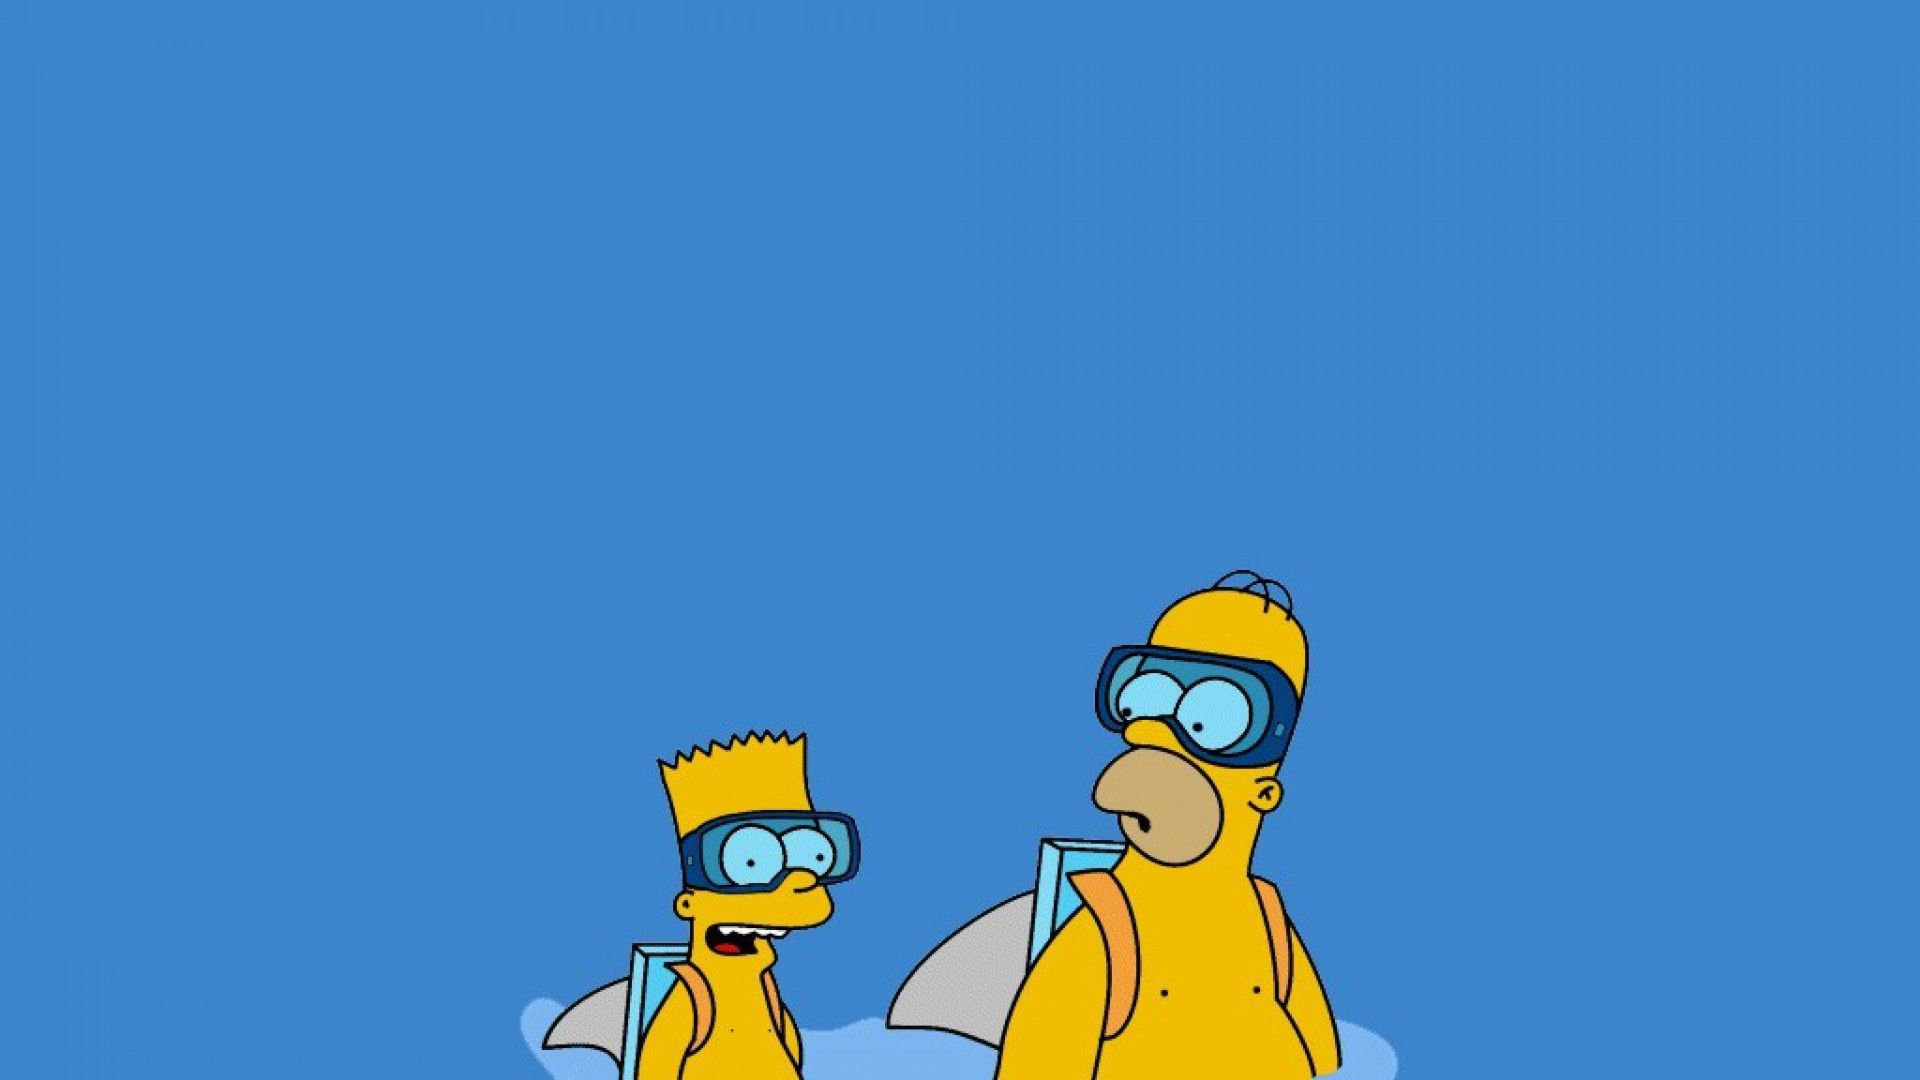 The Simpsons wallpaper 1920x1080 for macbook - Homer Simpson